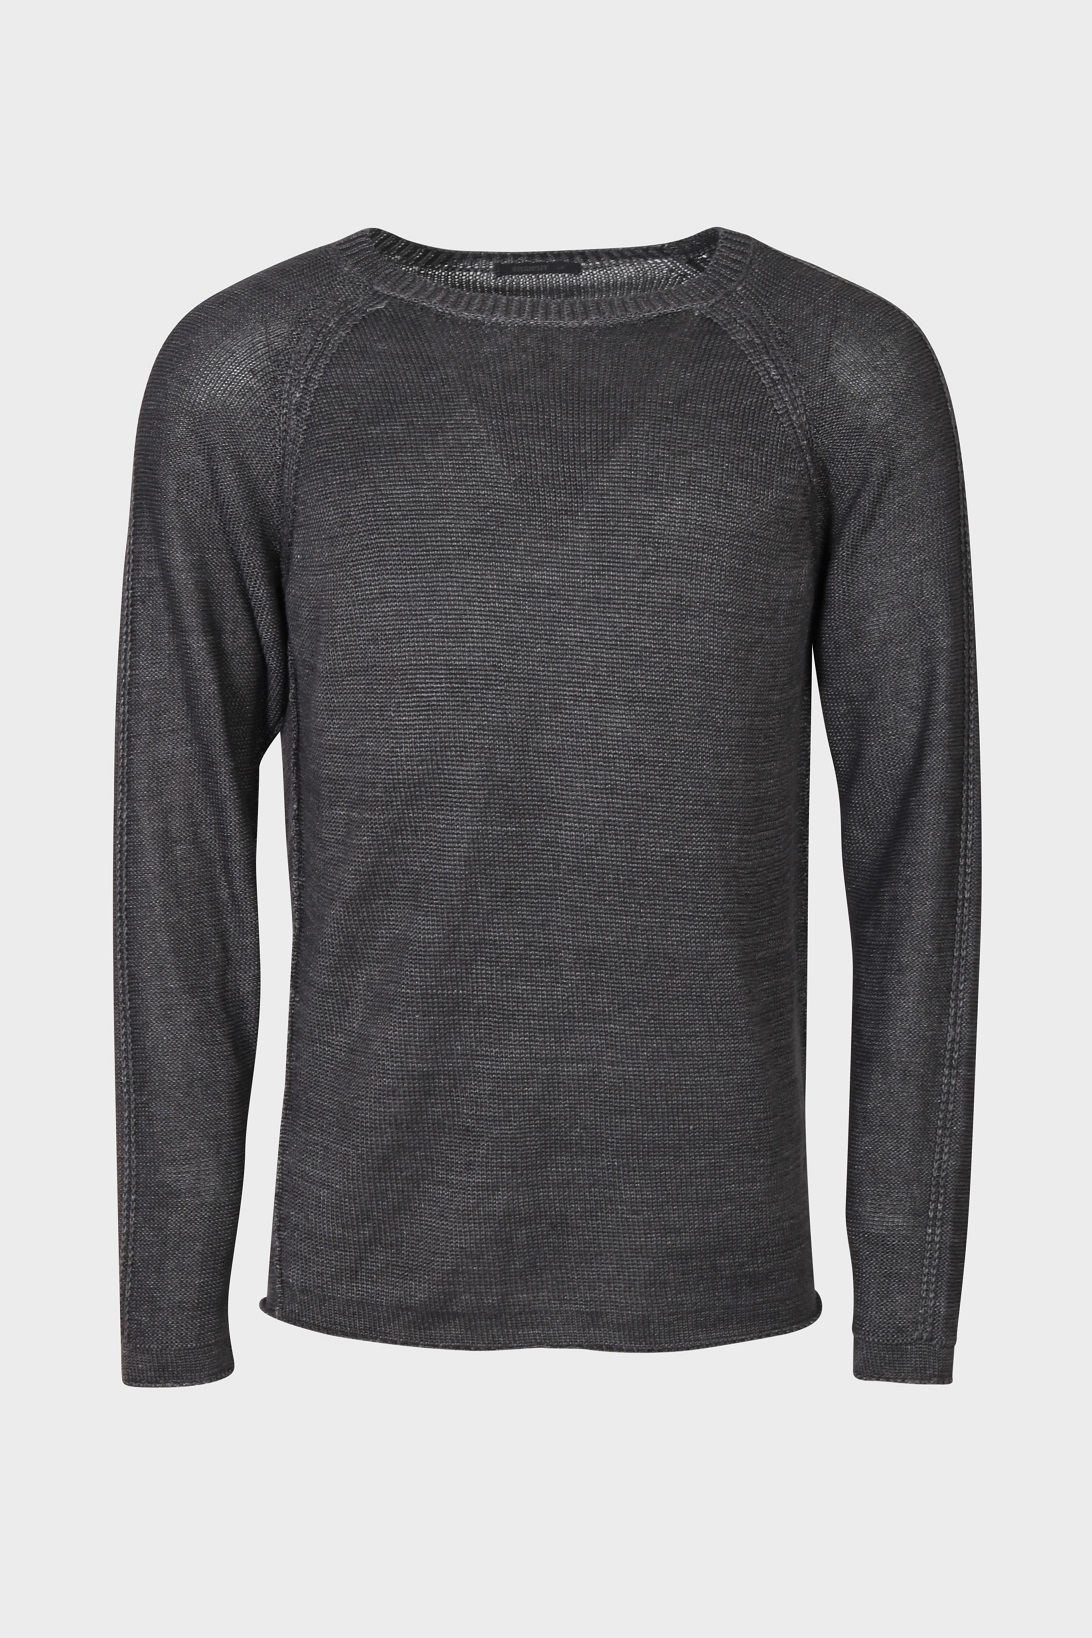 TRANSIT UOMO Linen Knit Pullover in Charcoal M